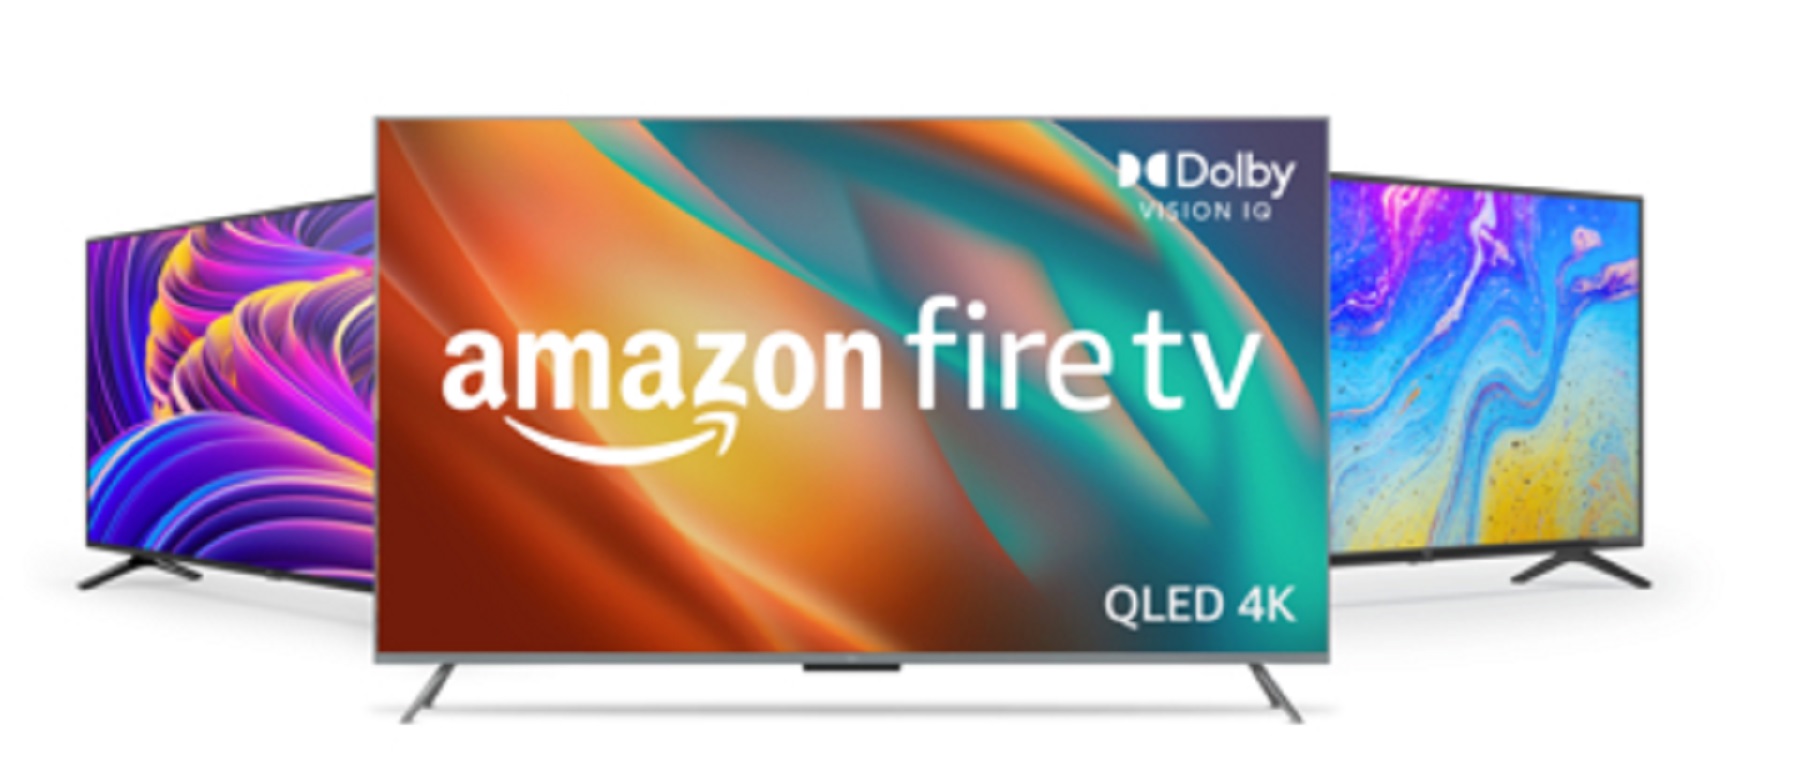 Amazon Fire TV Surpasses 200 Million Fire TV Devices Sold Globally, Expands Amazon-Built TV Lineup, and Brings its Smart TV to More Countries